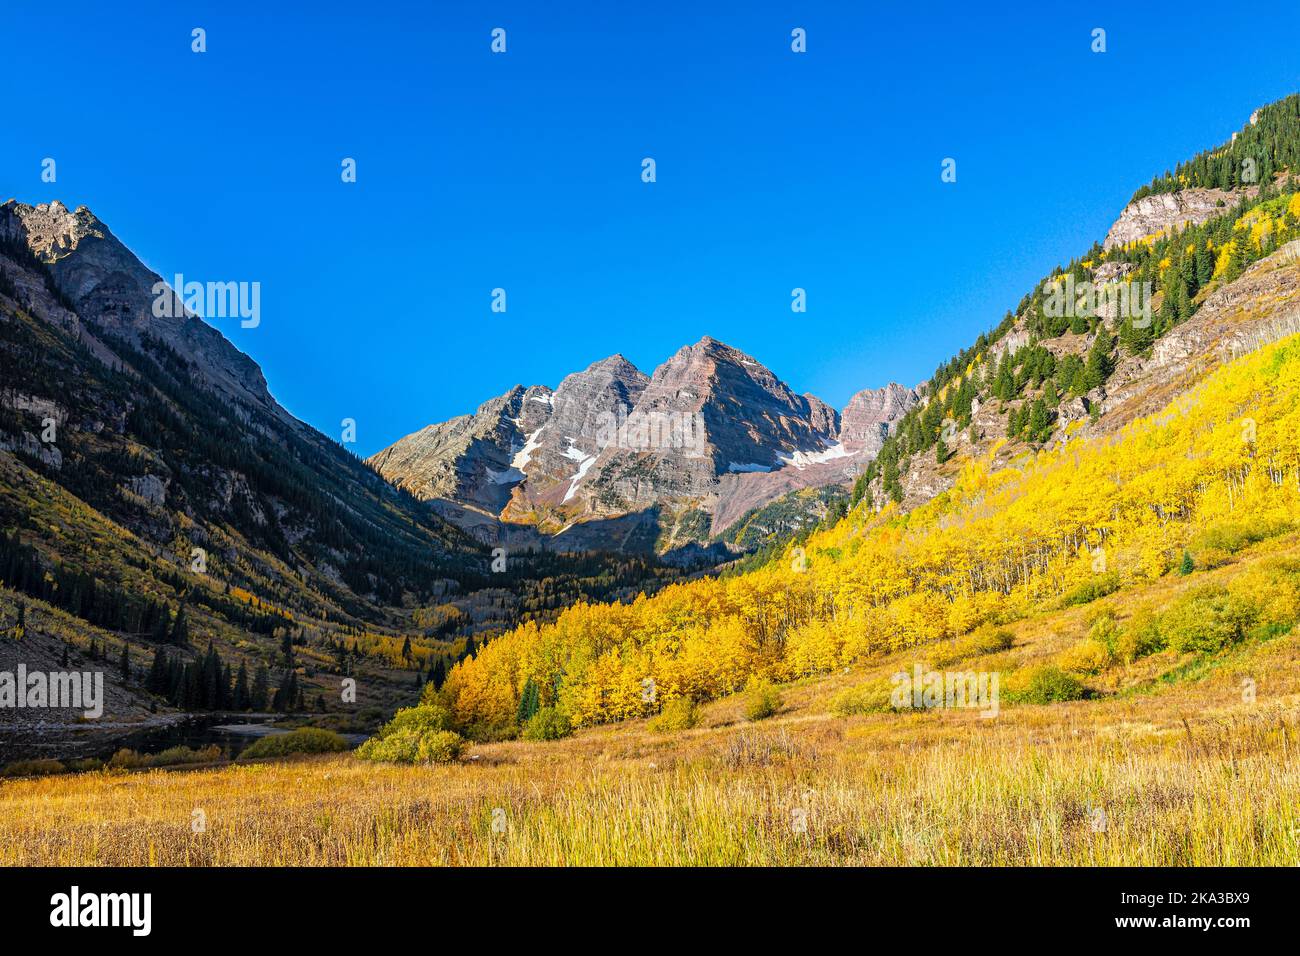 Aspen, Colorado Maroon Bells rocky mountains in October fall autumn season with yellow golden trees foliage and clear blue sky in morning sunrise with Stock Photo